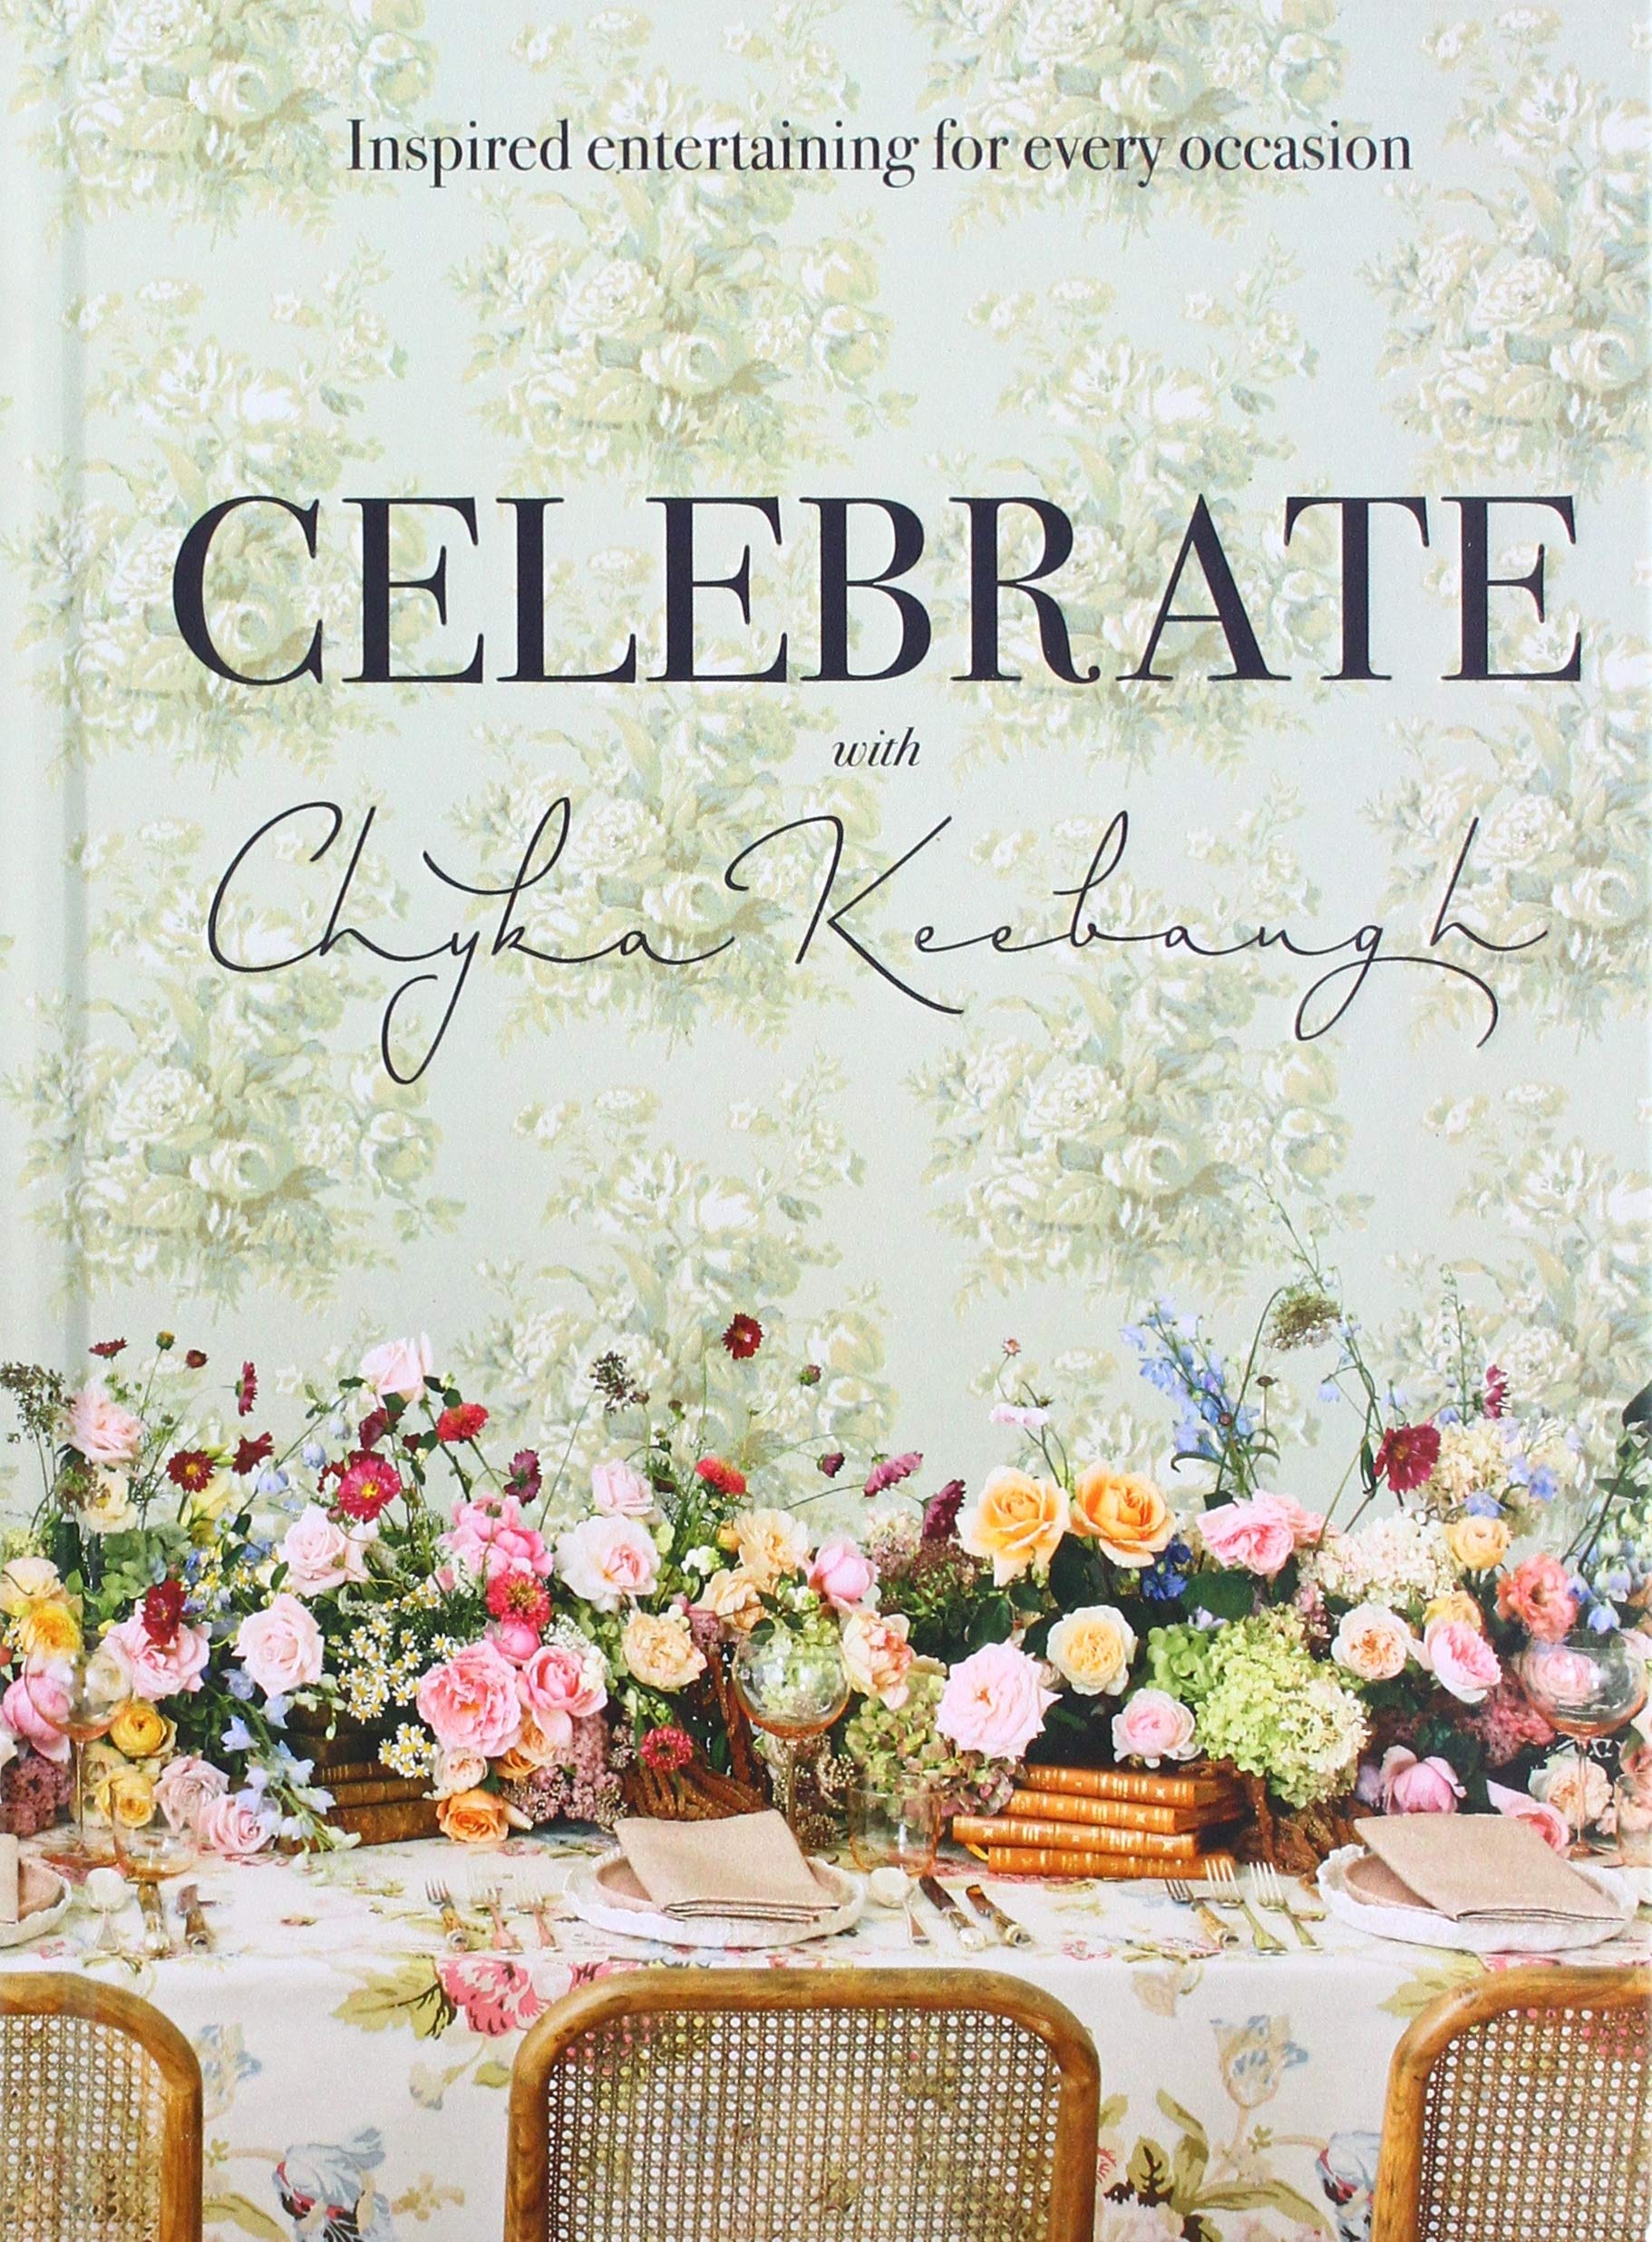 Celebrate with Chyka Keebaugh: Inspired Entertaining for Every Occasion